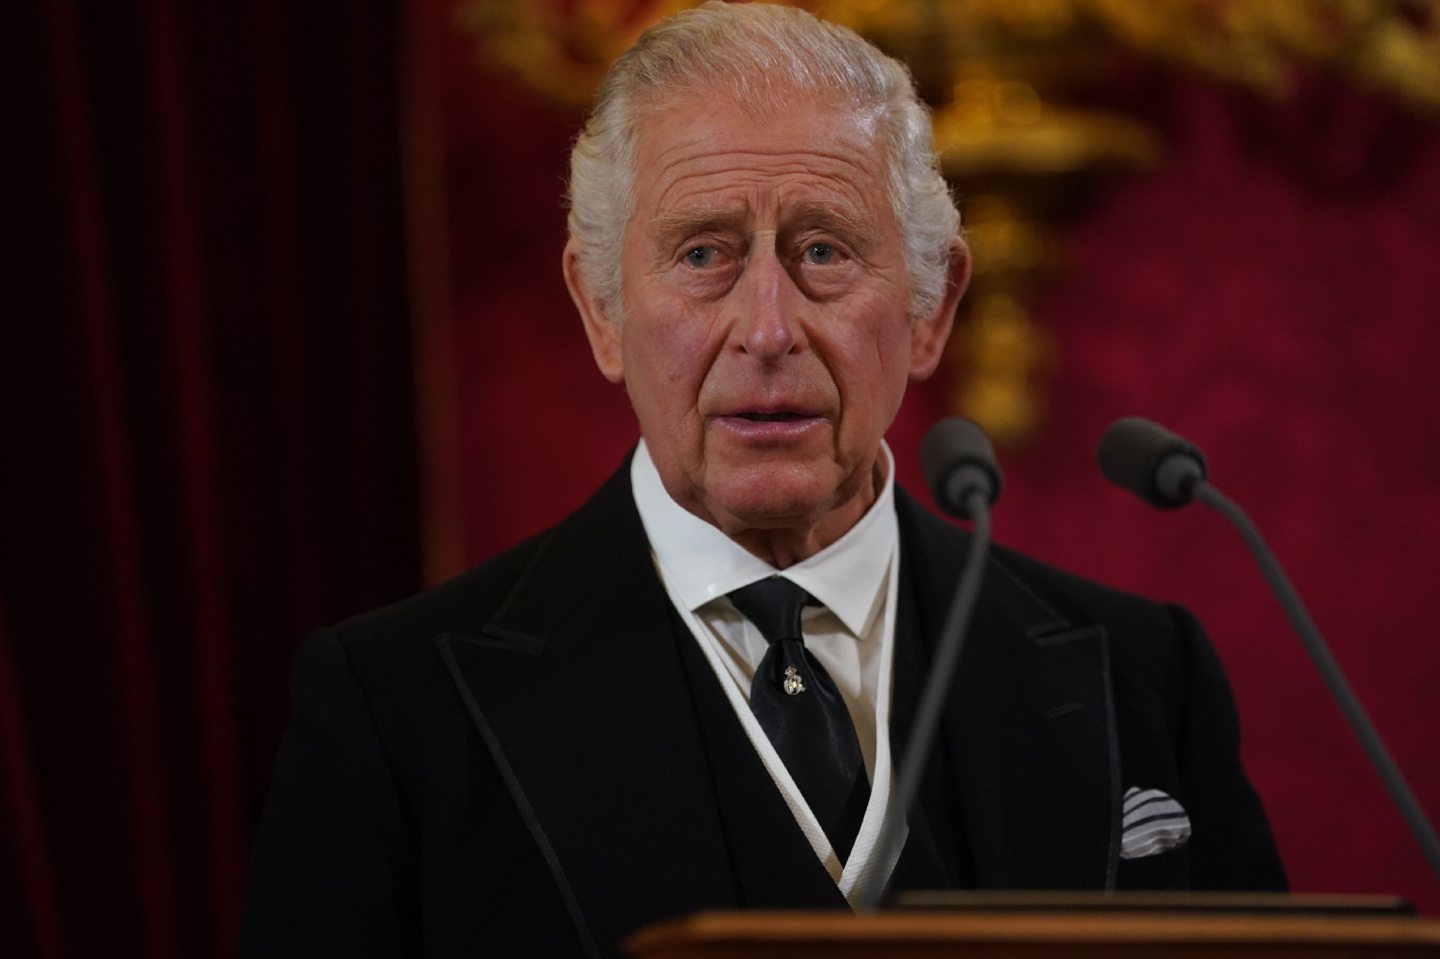 King Charles looking solemn while standing at podium giving a speech 